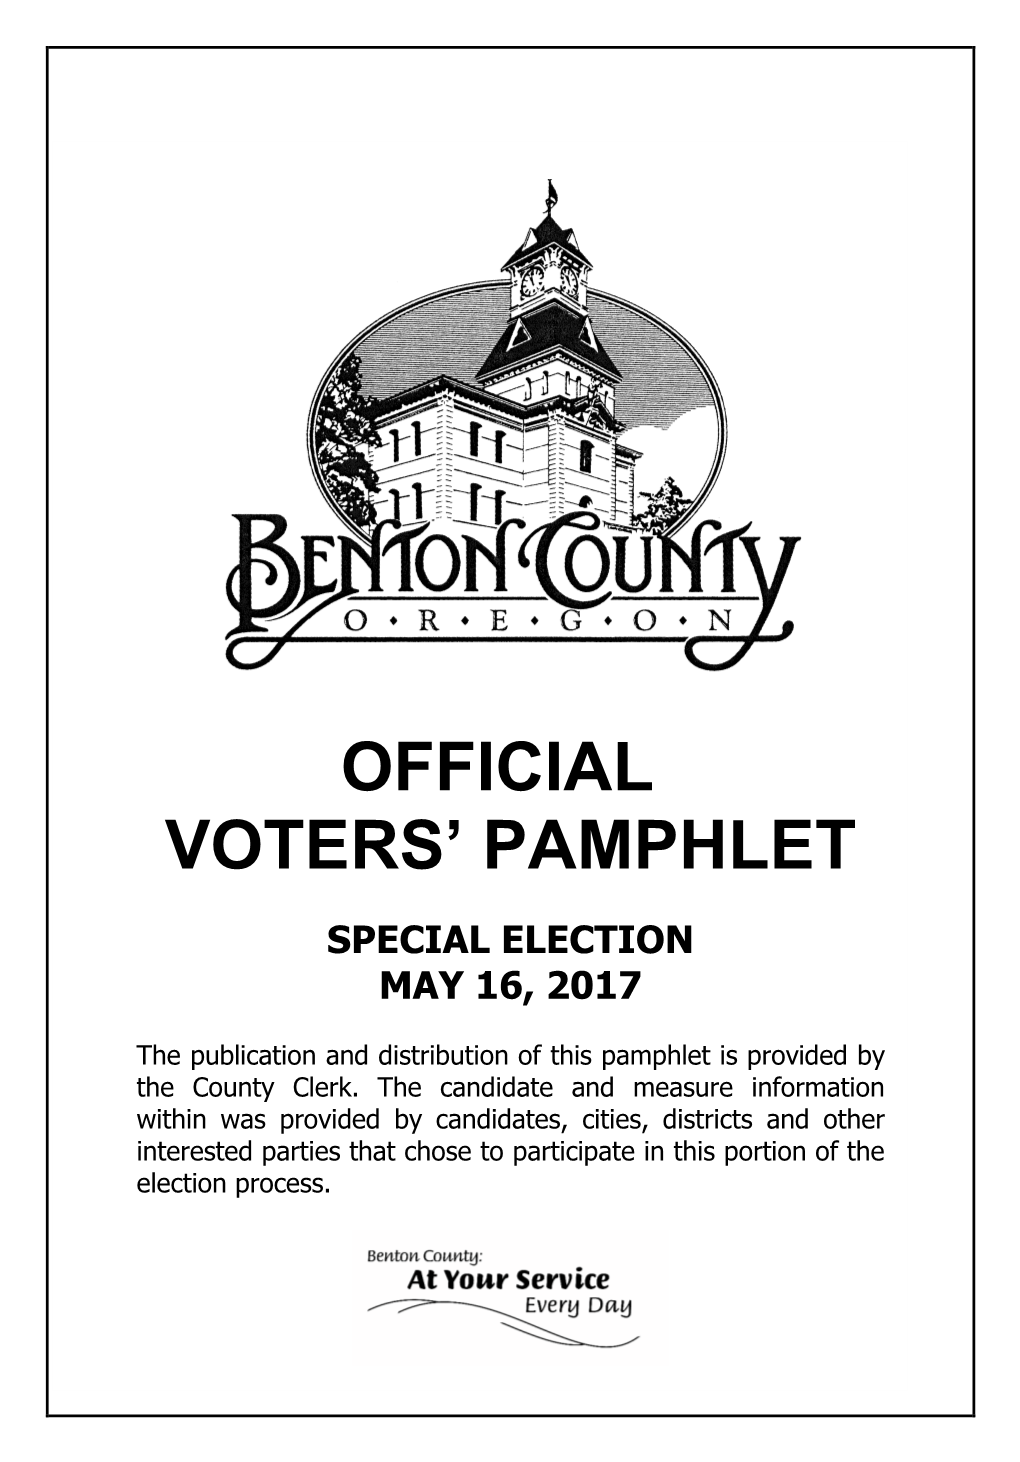 Official Voters' Pamphlet